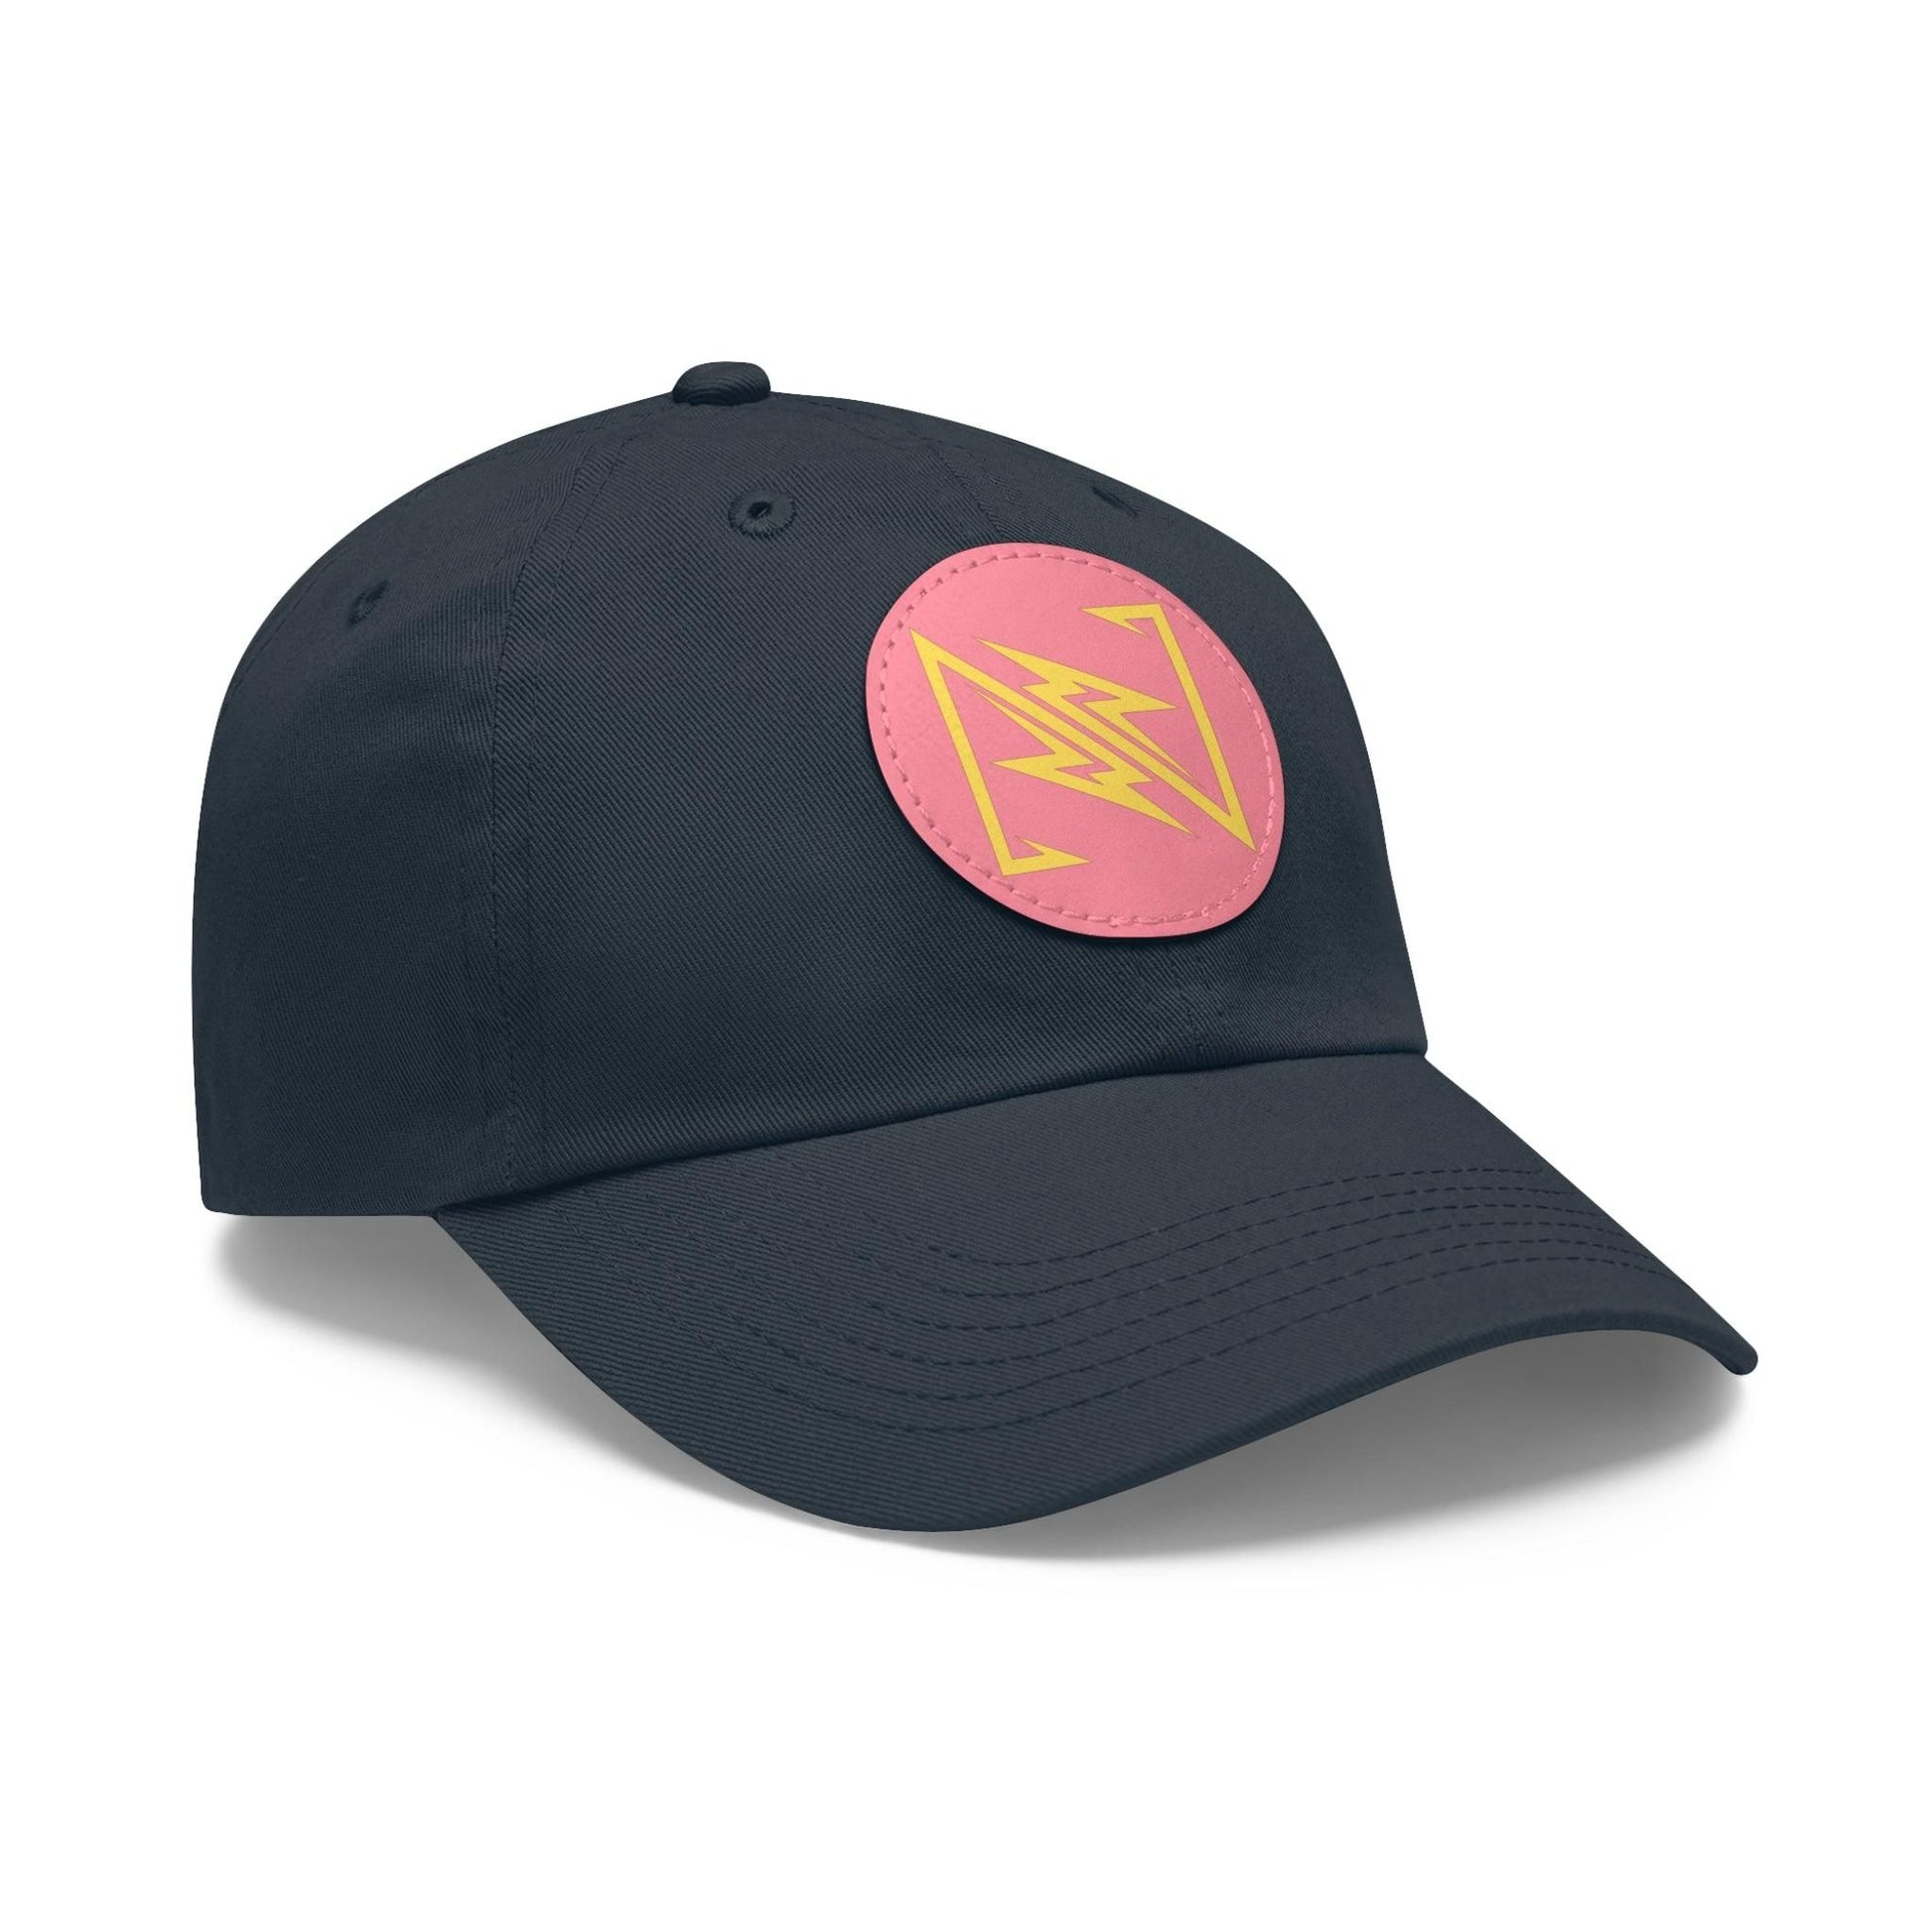 NX Vogue Baseball Hat with Leather Patch Cap Navy / Pink patch Circle One size